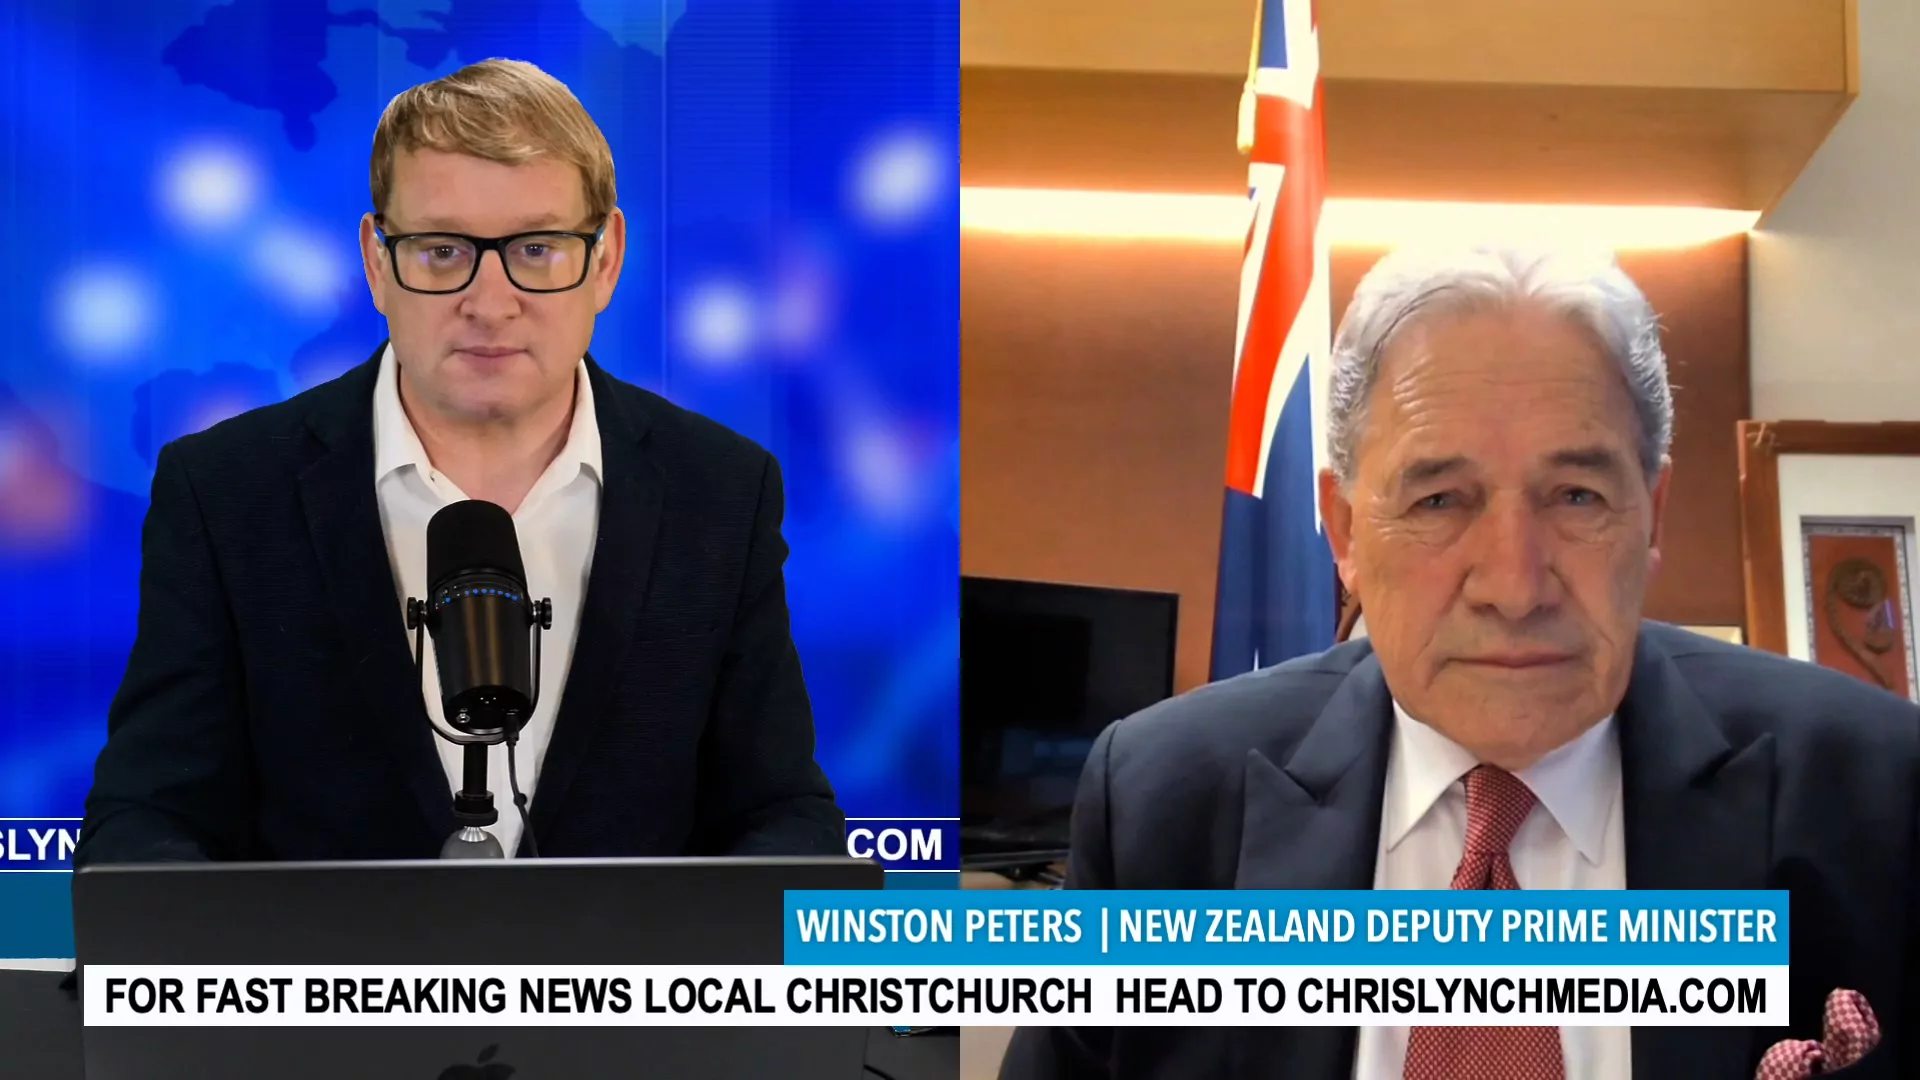 Winston Peters blasts legacy media for “gaslighting” public by burying COVID-19 Inquiry update